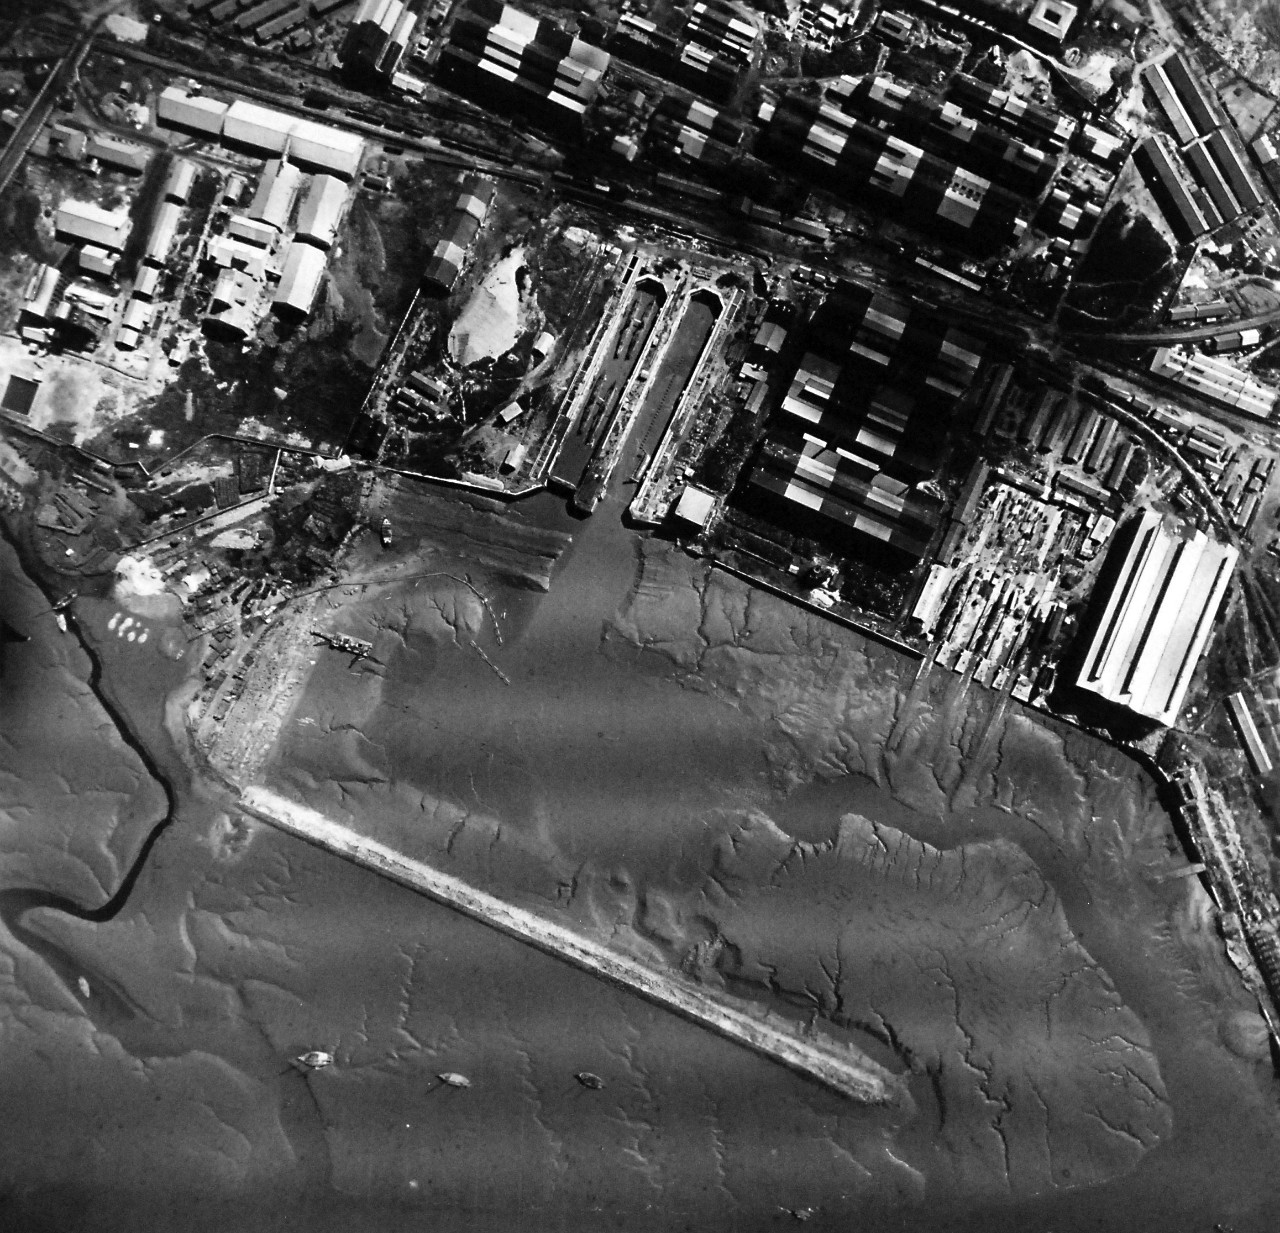 80-G-389988:  Aerial of Inchon, Korea, September 8, 1945.   Dock area and waterfront at Jinsen, (Inchon), Korea, September 8, 1945.  Photographed by PhoM Sanders.    U.S. Navy photograph, now in the collections of the National Archives.  